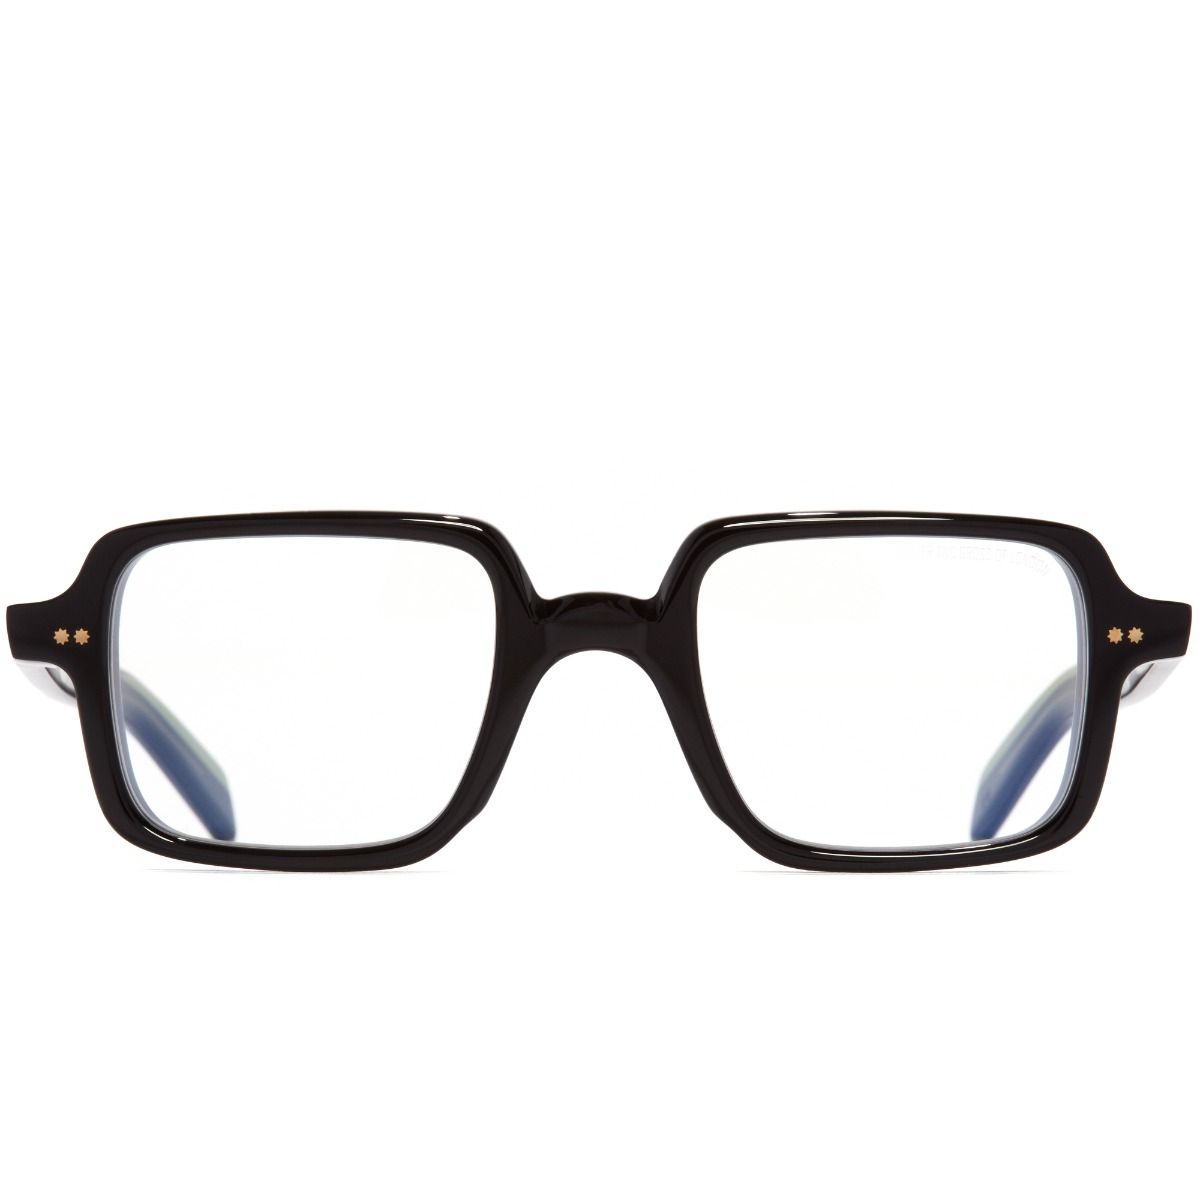 GR02 Rectangle Optical Glasses - Black by Cutler and Gross